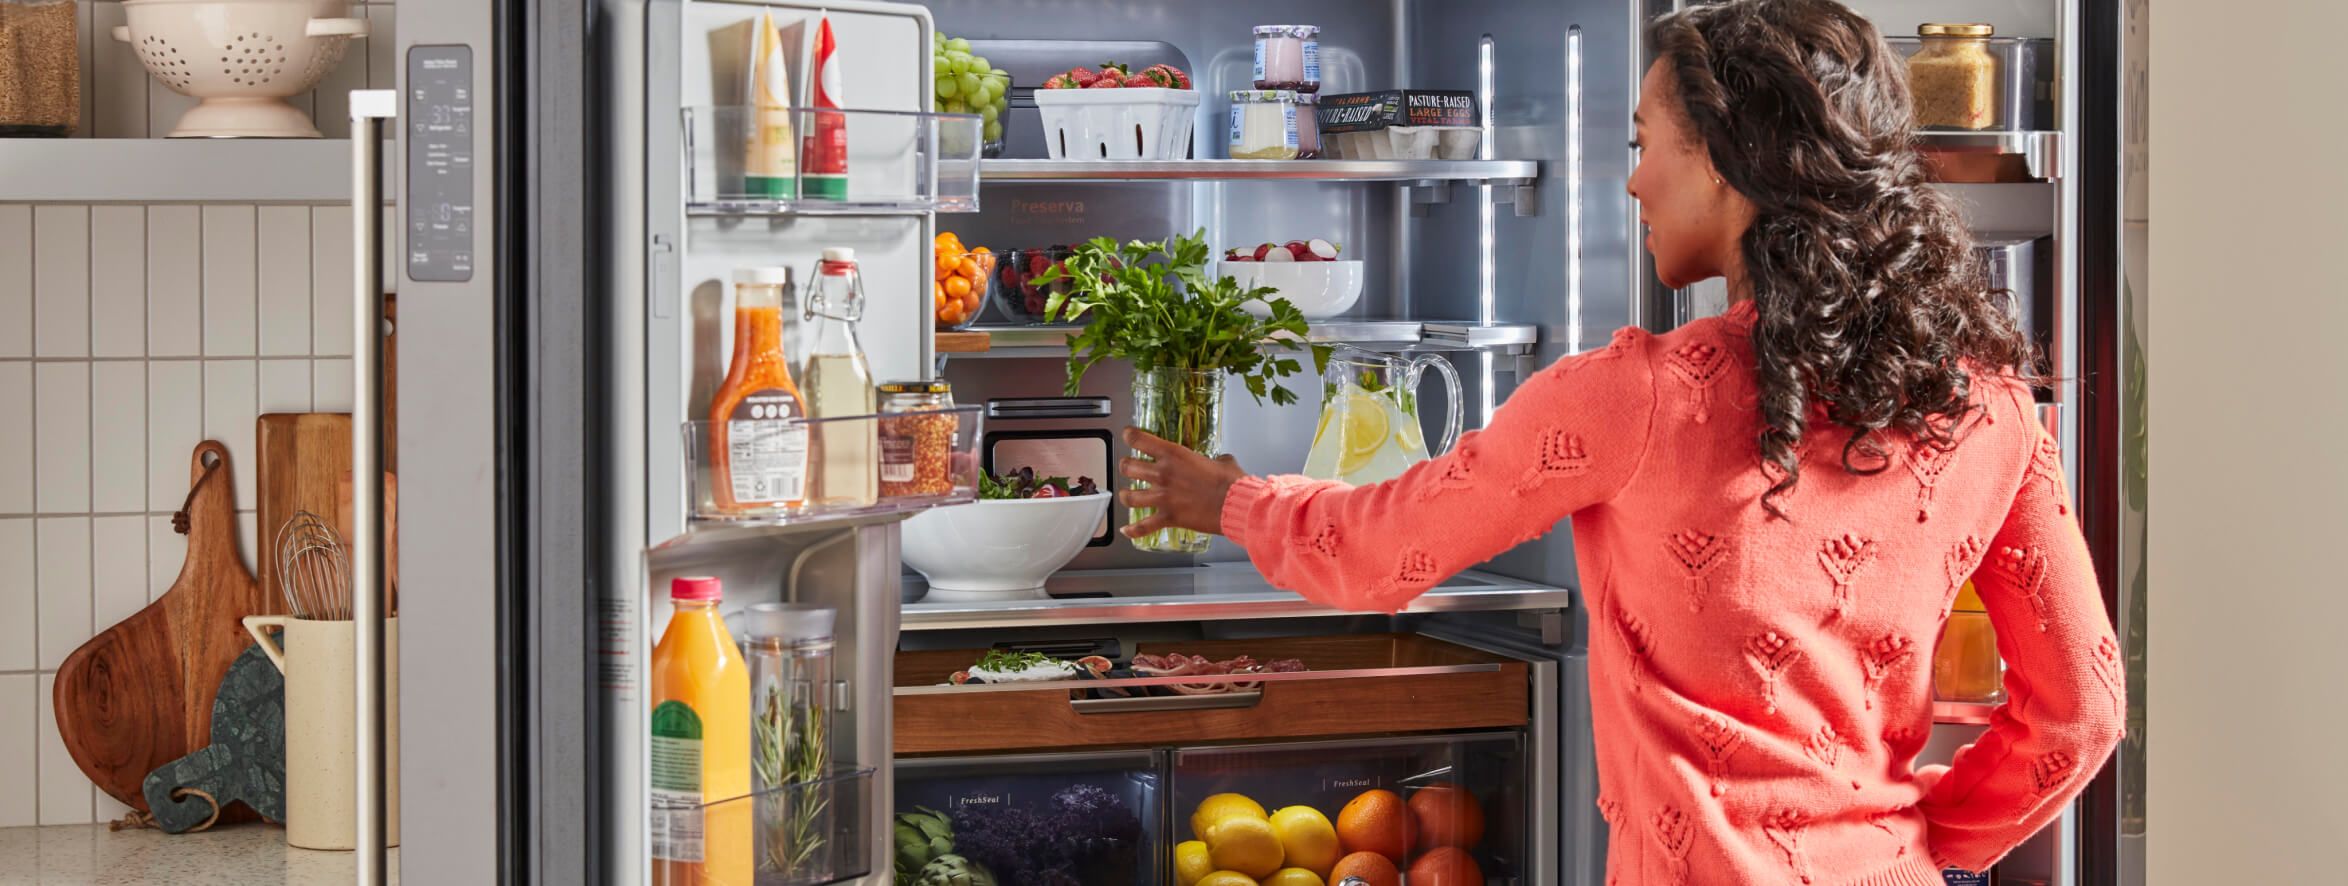 Woman reaching into KitchenAid® French Door Refrigerator to grab a jar holding fresh tender herbs.